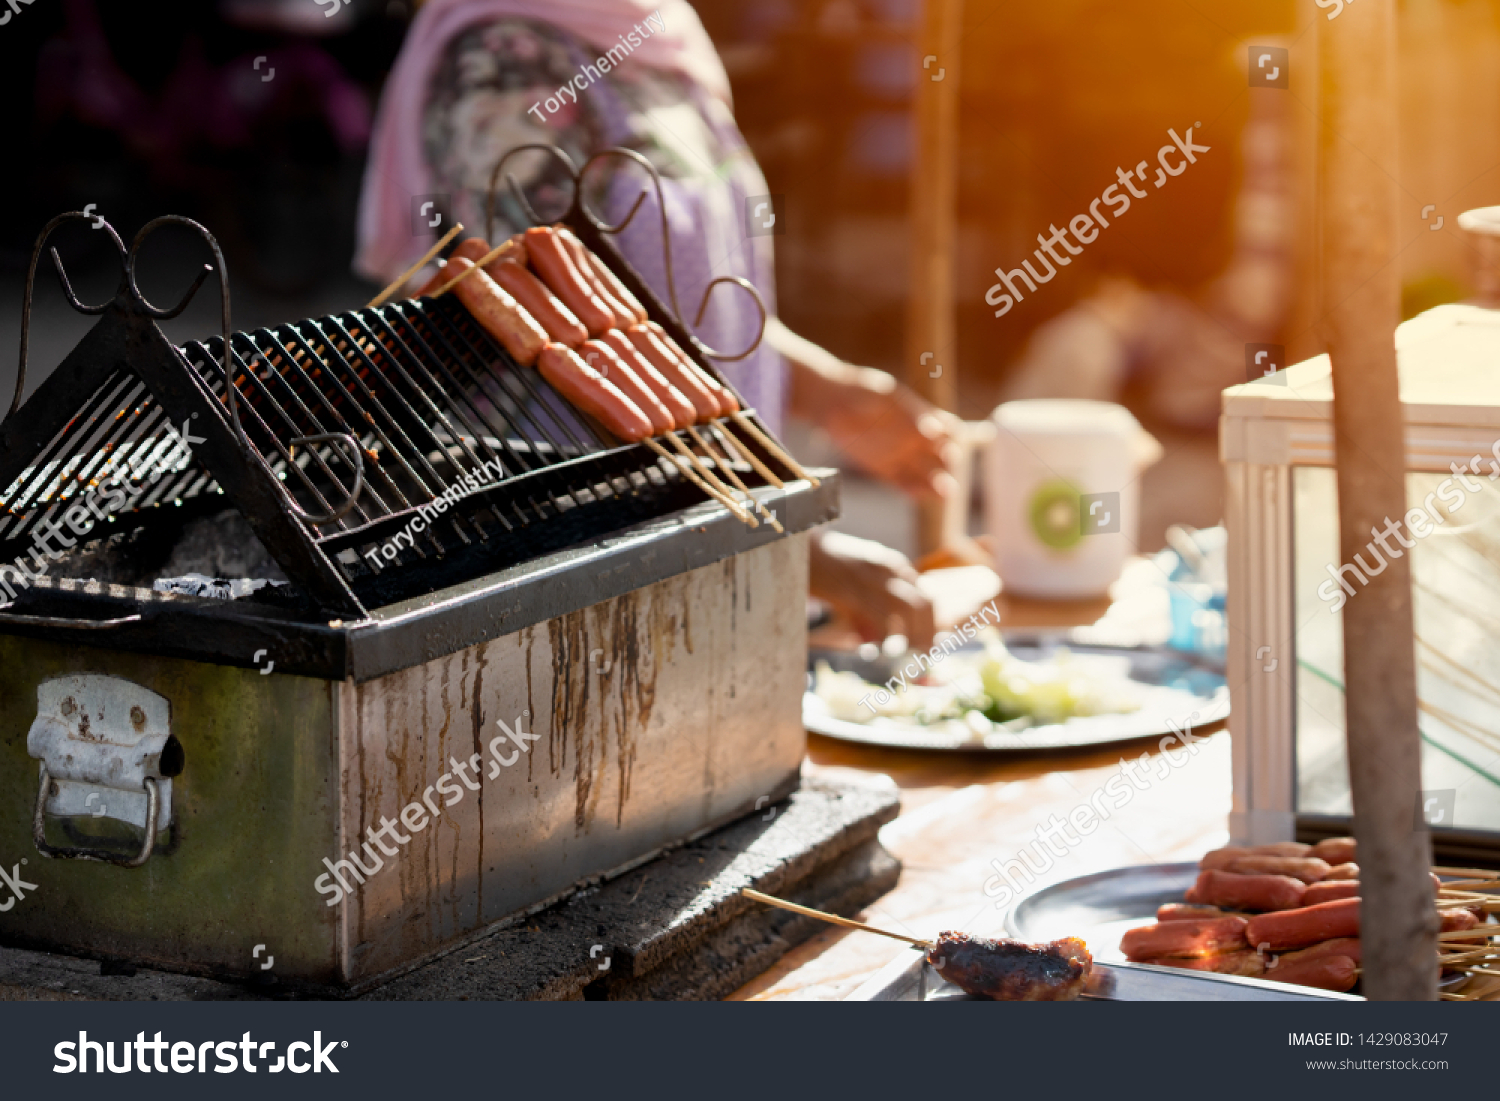 Hot Dog Meatball Roasted On Grill Stock Photo Edit Now